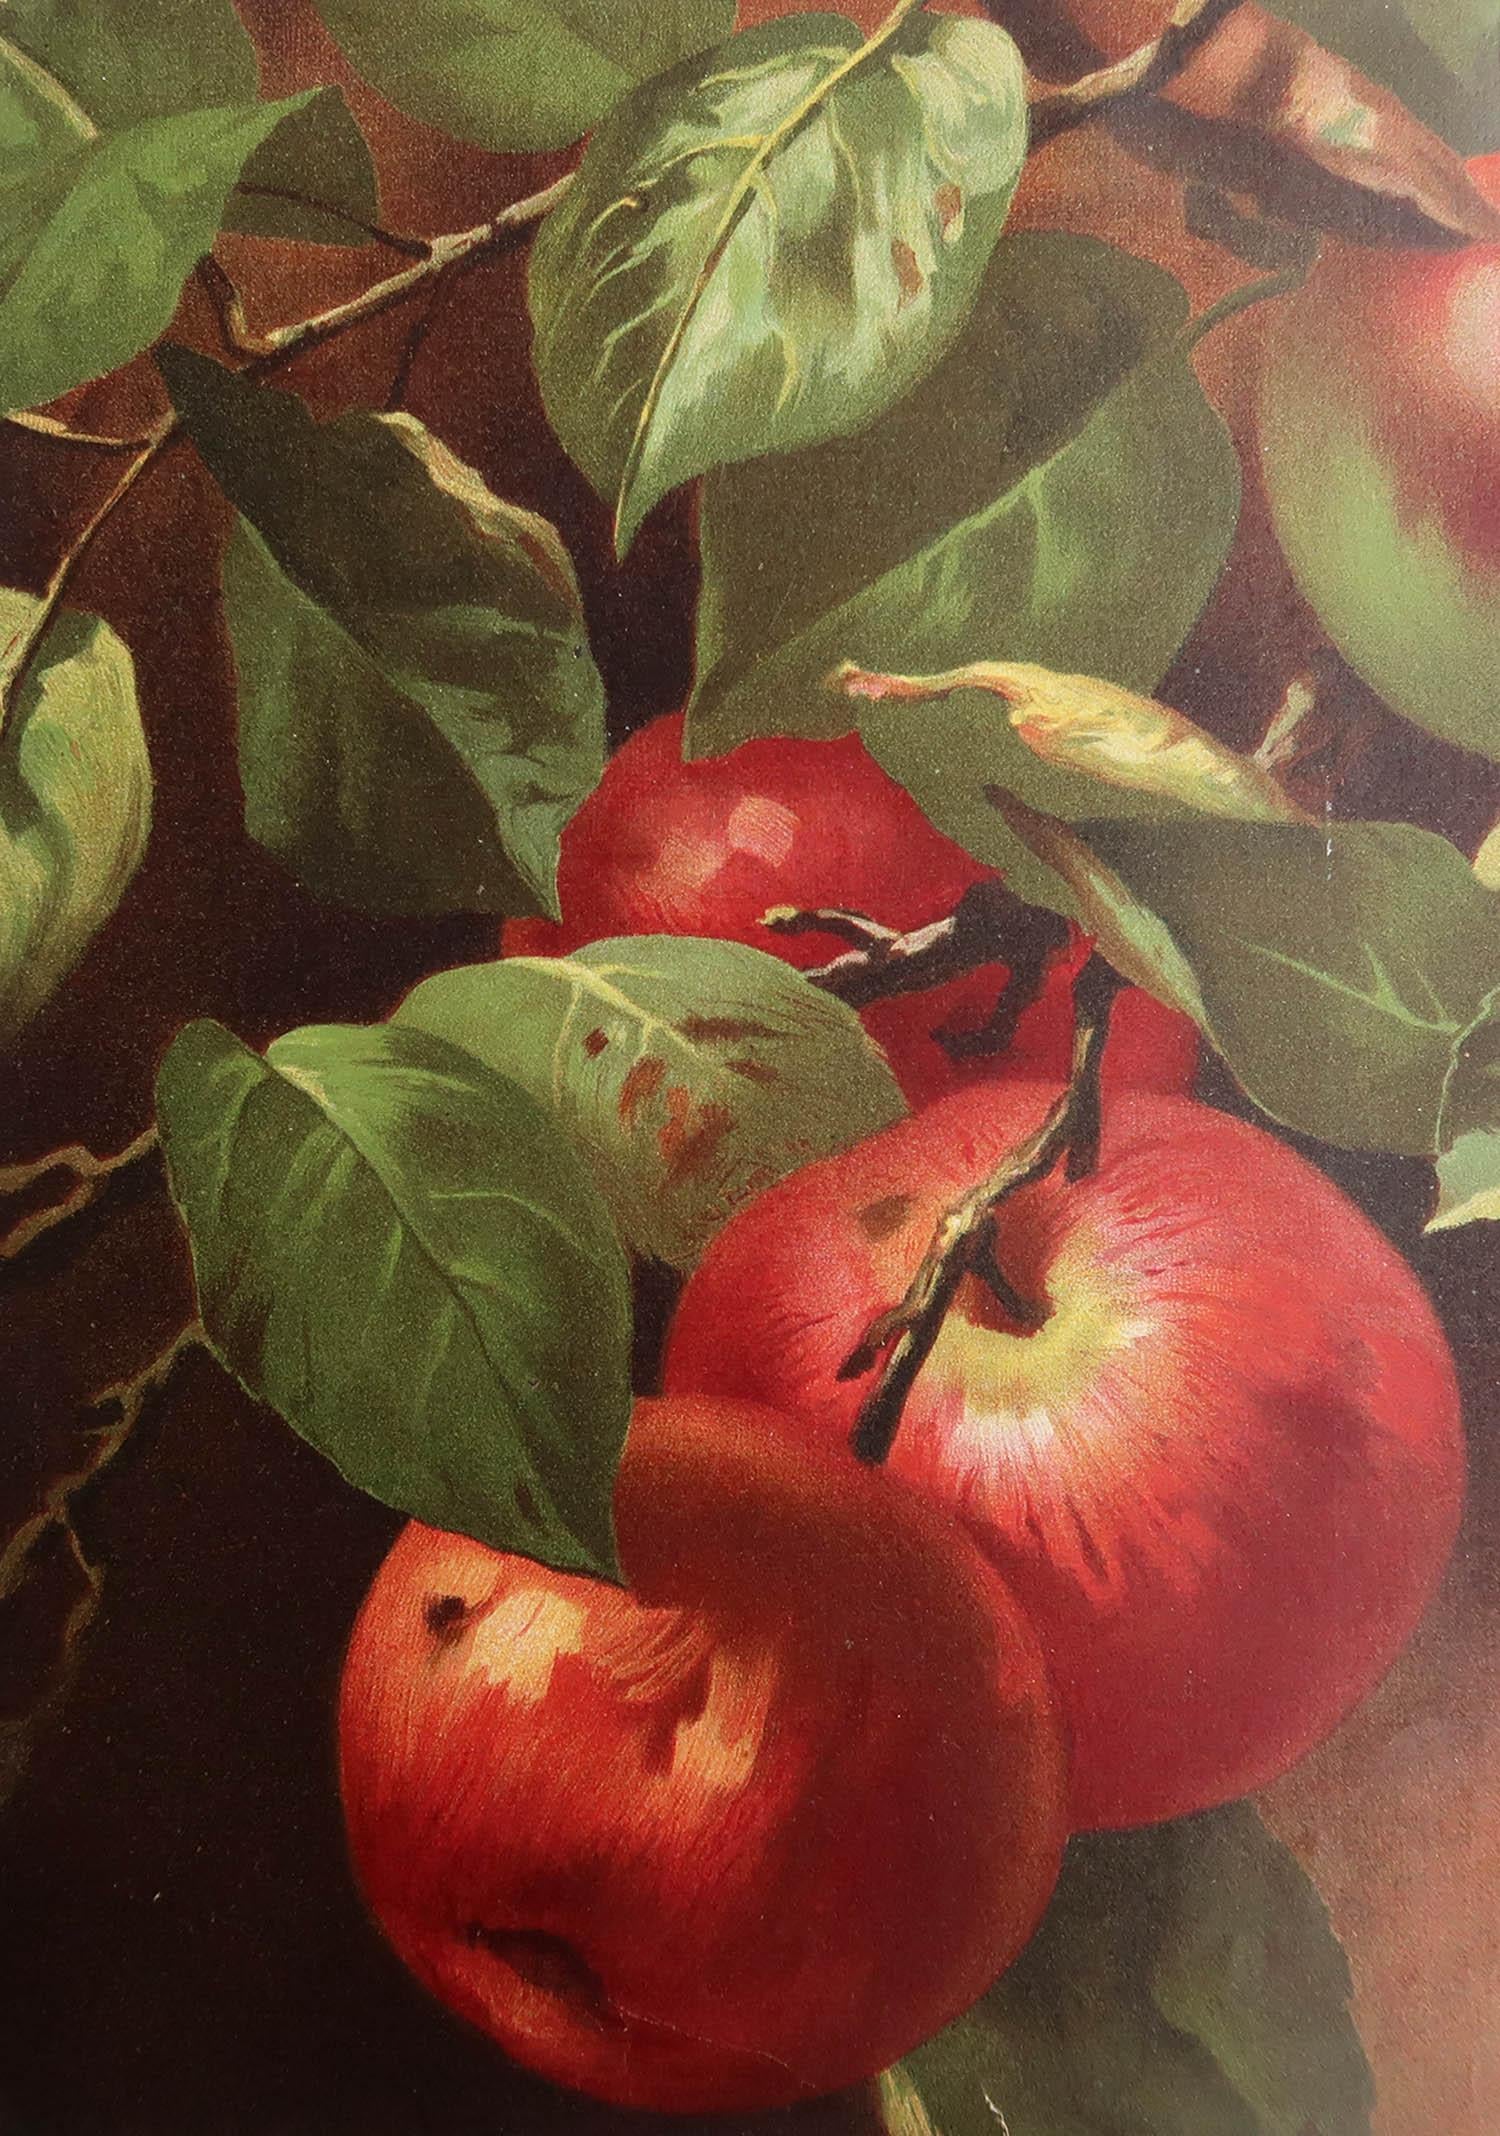 Great image of apples

Chromo-lithograph

Published by Edward Arnold. circa 1860

Unframed. It gives you the option of perhaps making a set up using your own choice of frames.














